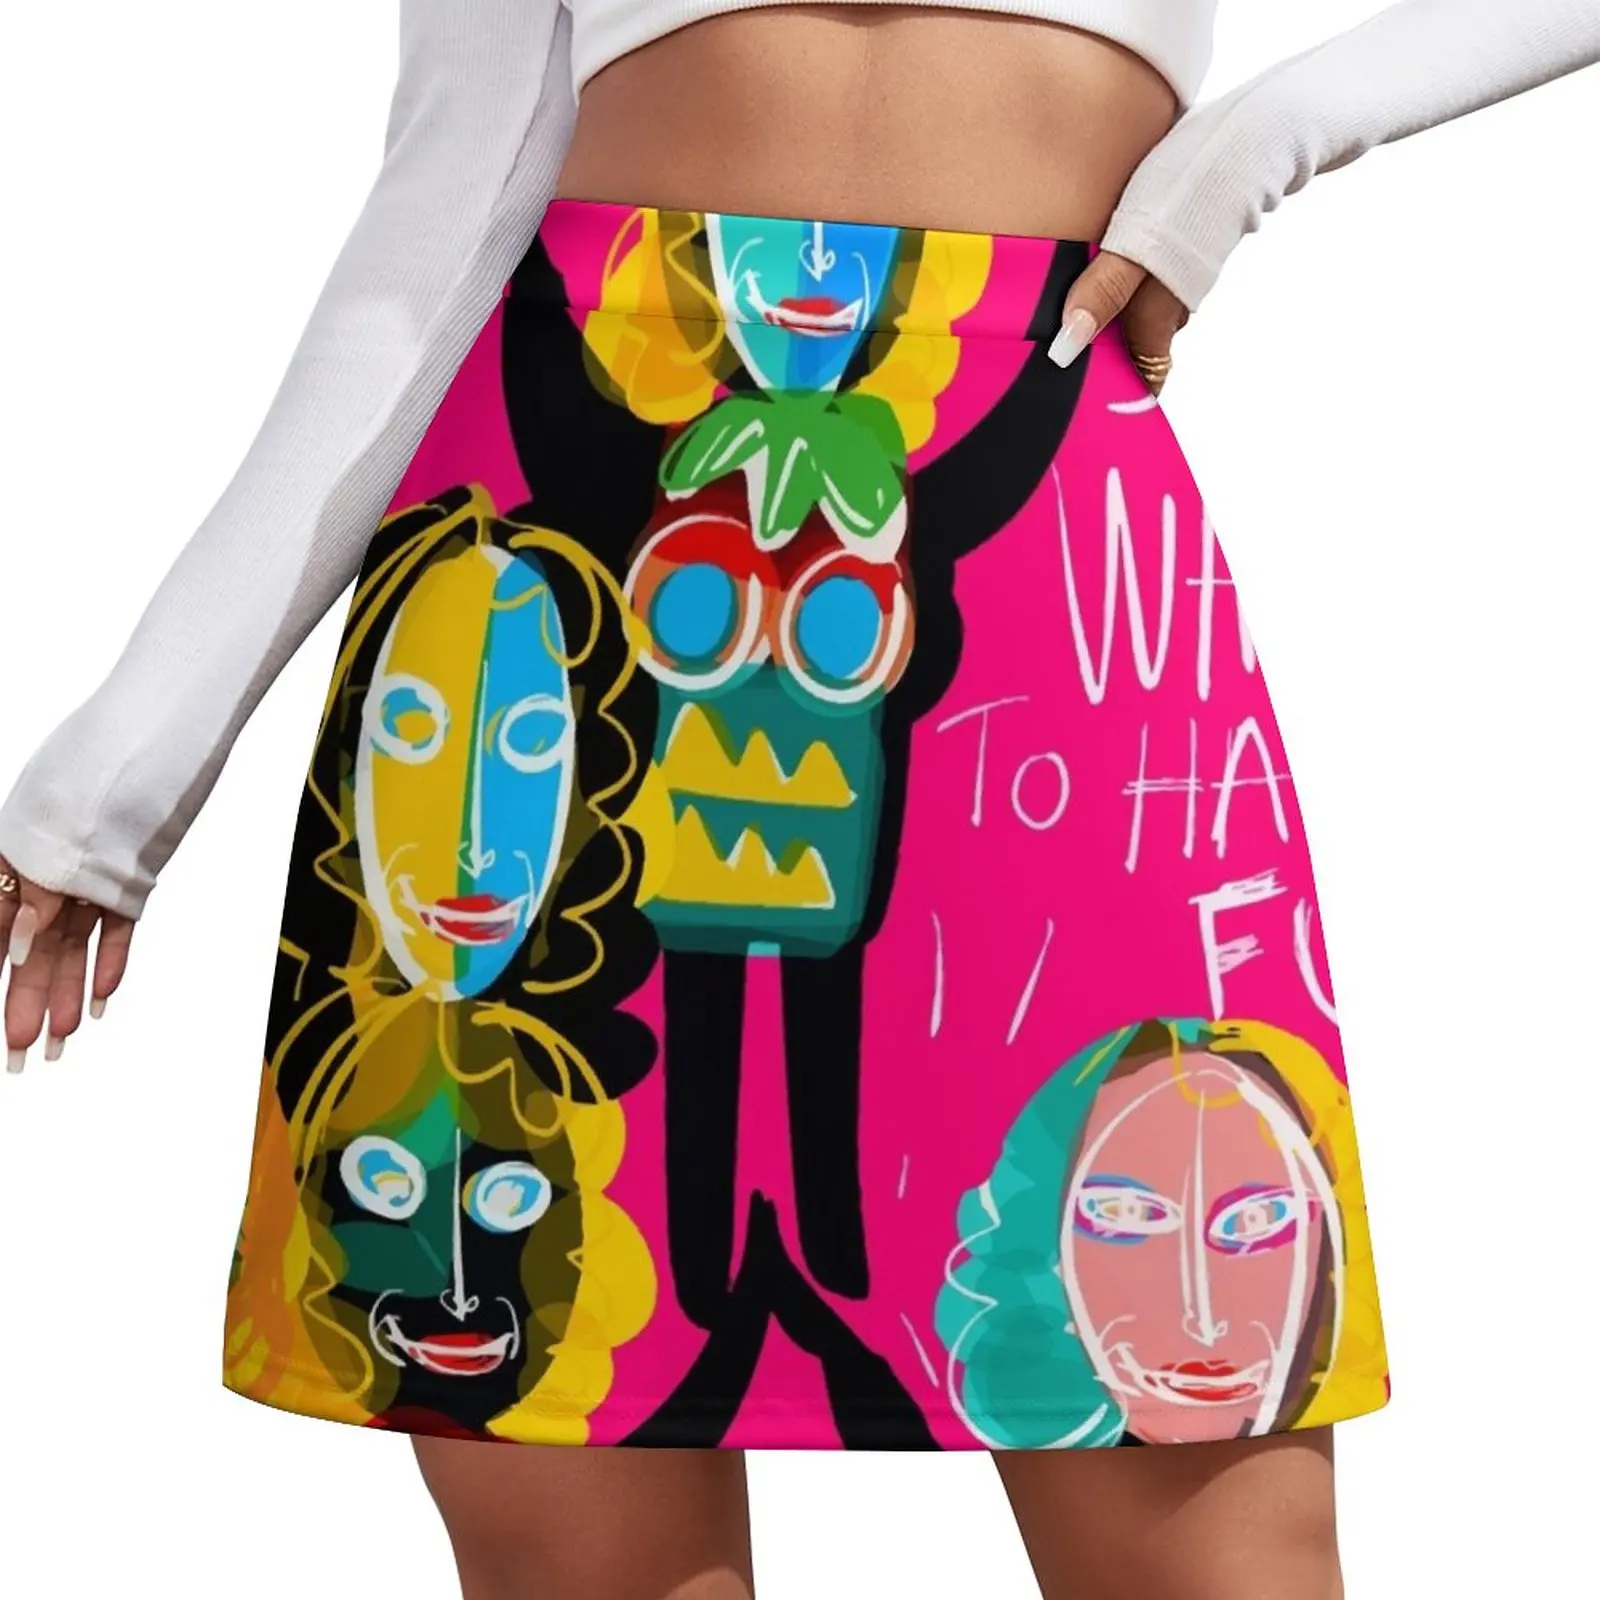 Girls just want to have fun street art graffiti Mini Skirt skorts for women kawaii clothes new goth pants graffiti smiling face print baggy jeans women straight loose american couples street y2k high waist slouchy jeans